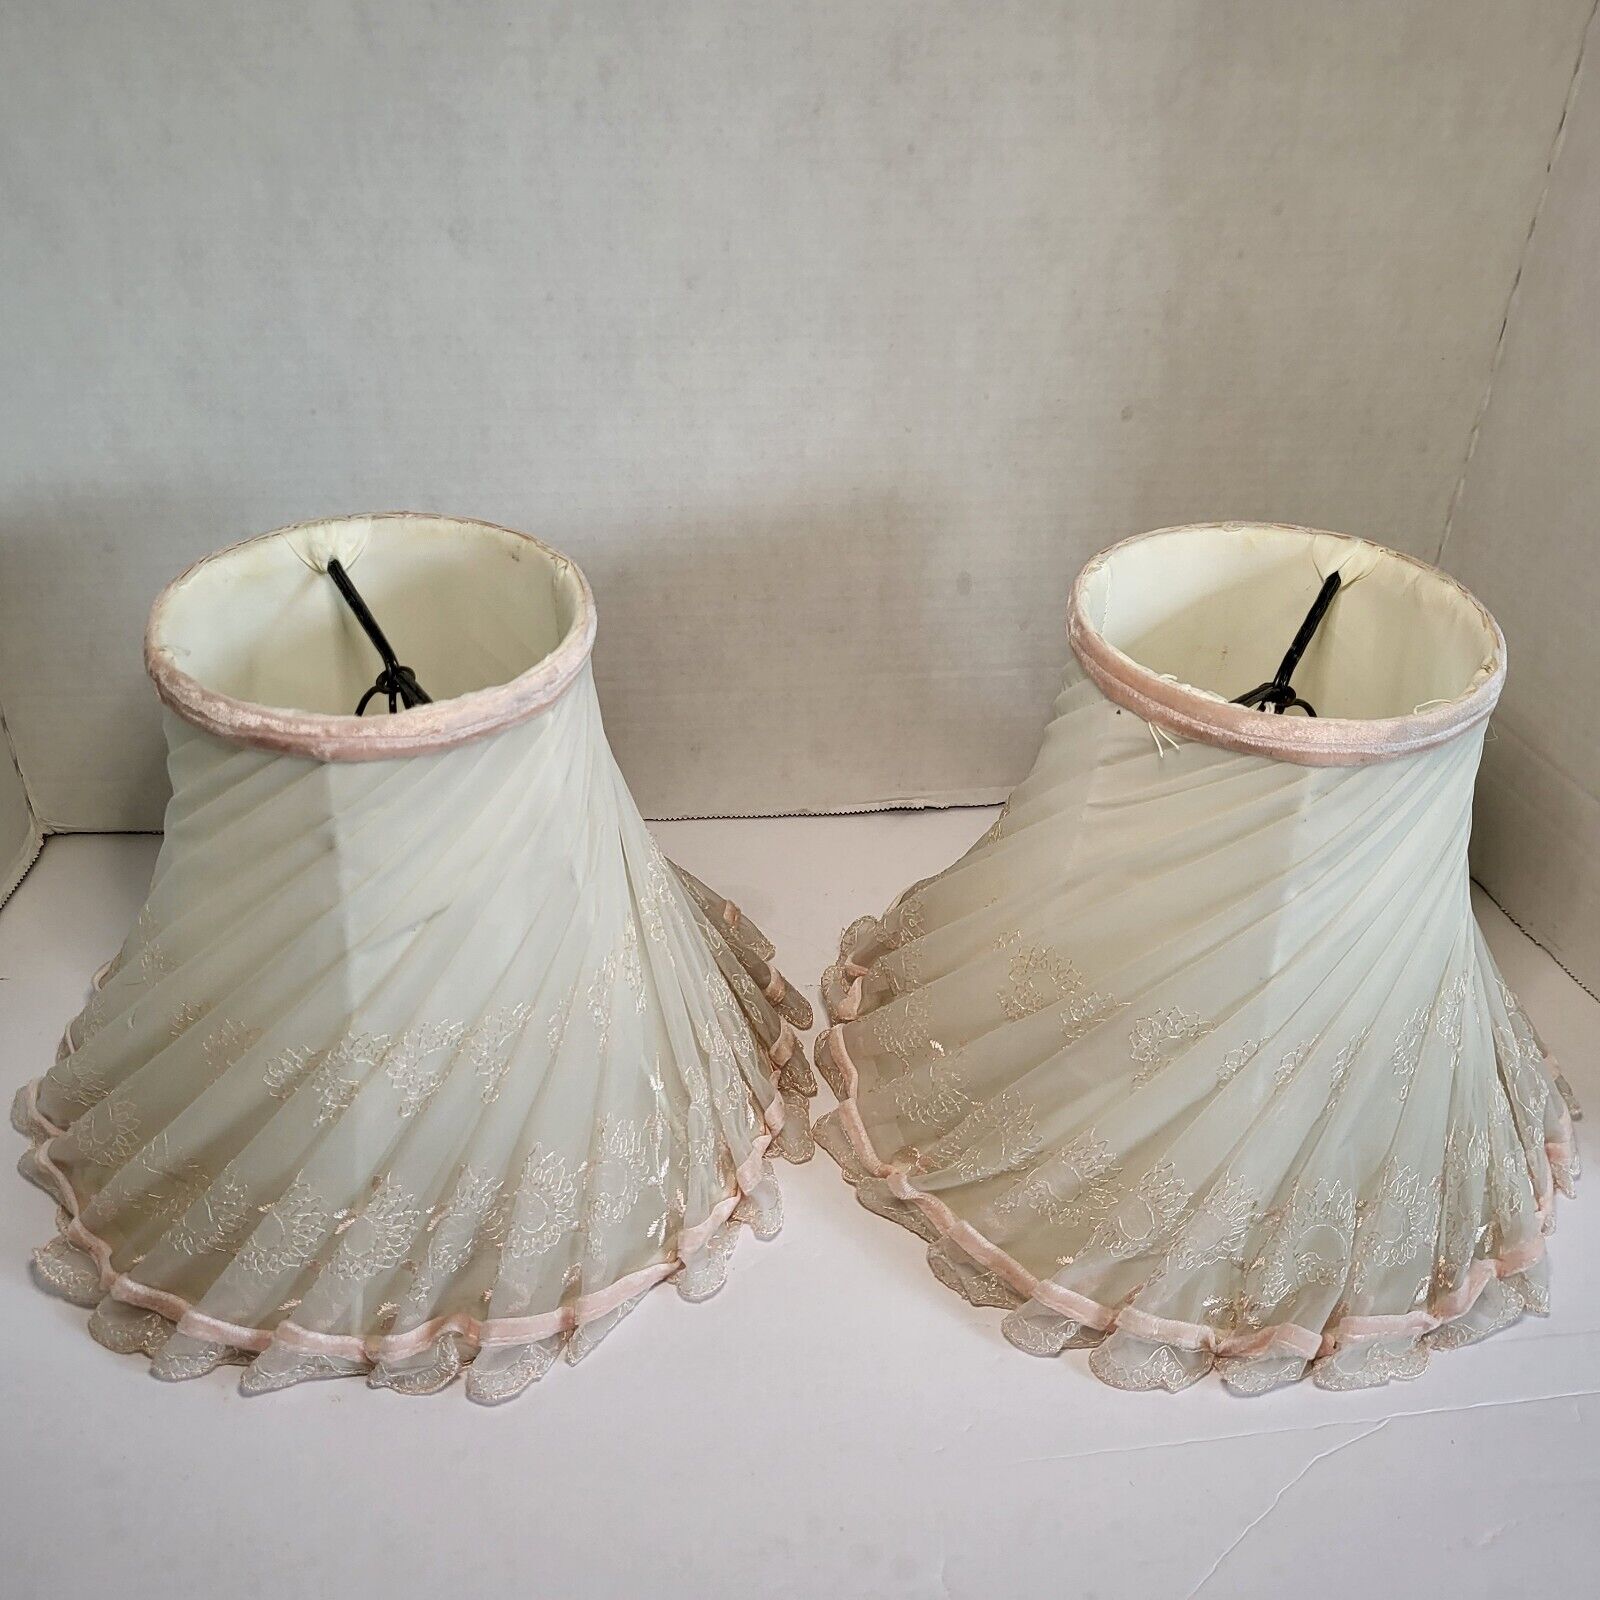 Vintage Roseart Lampshades Pair Style 305 White With Pink Trim 7.25 Tall NWT 50s